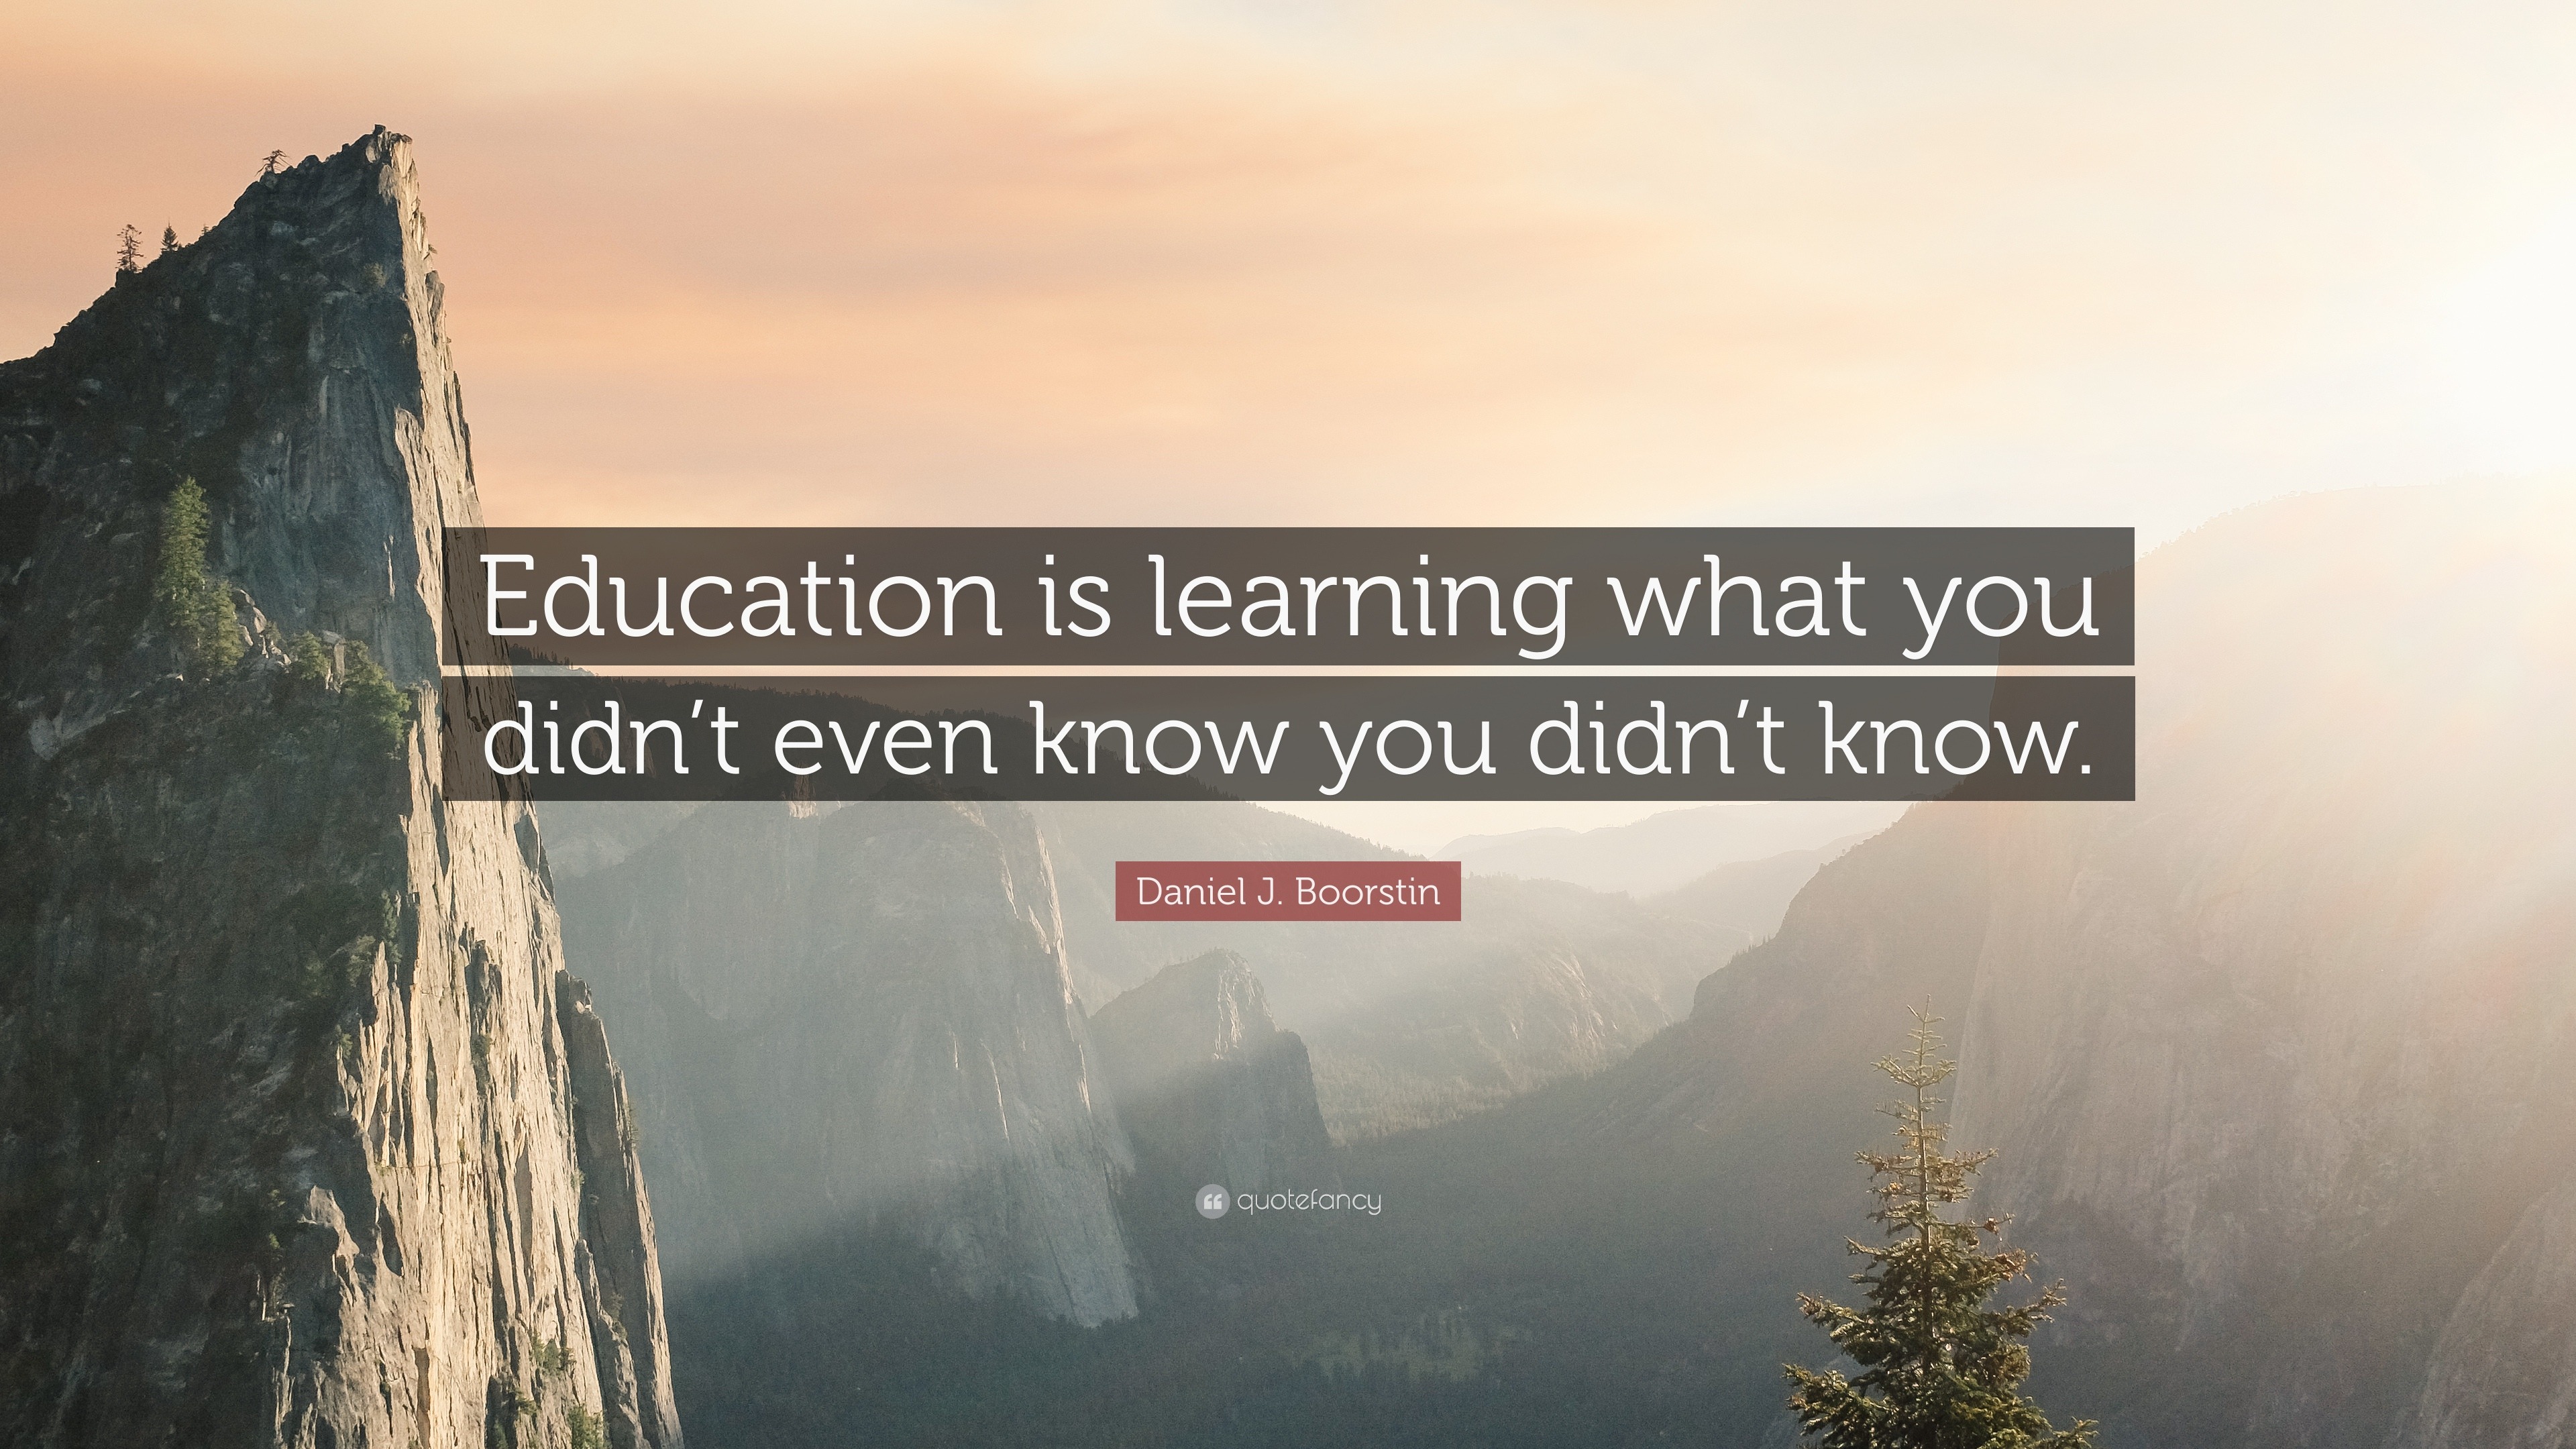 Daniel J. Boorstin Quote: “Education is learning what you didn’t even ...